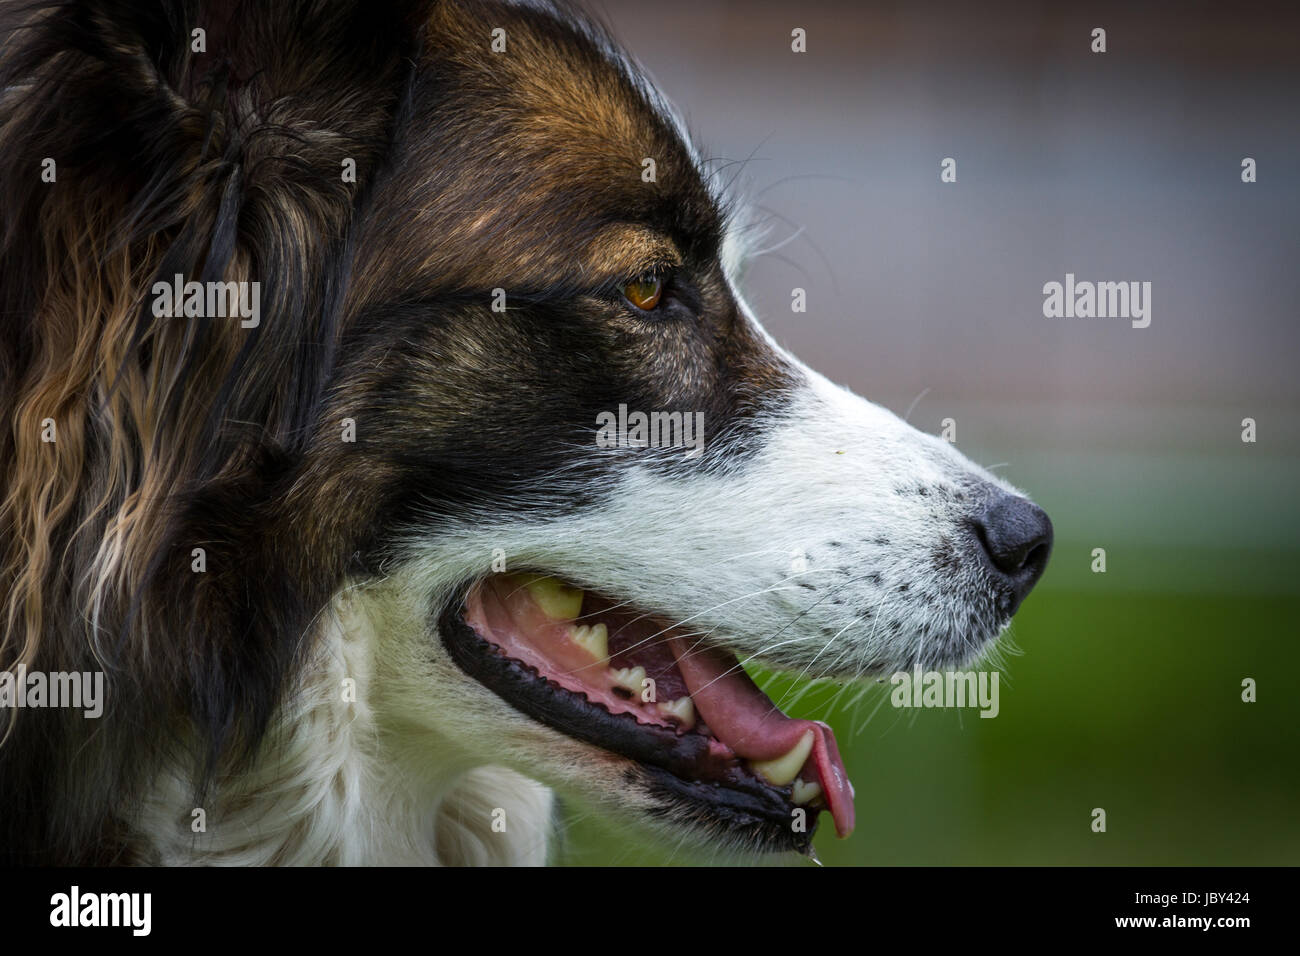 Hubscher Hund High Resolution Stock Photography and Images - Alamy